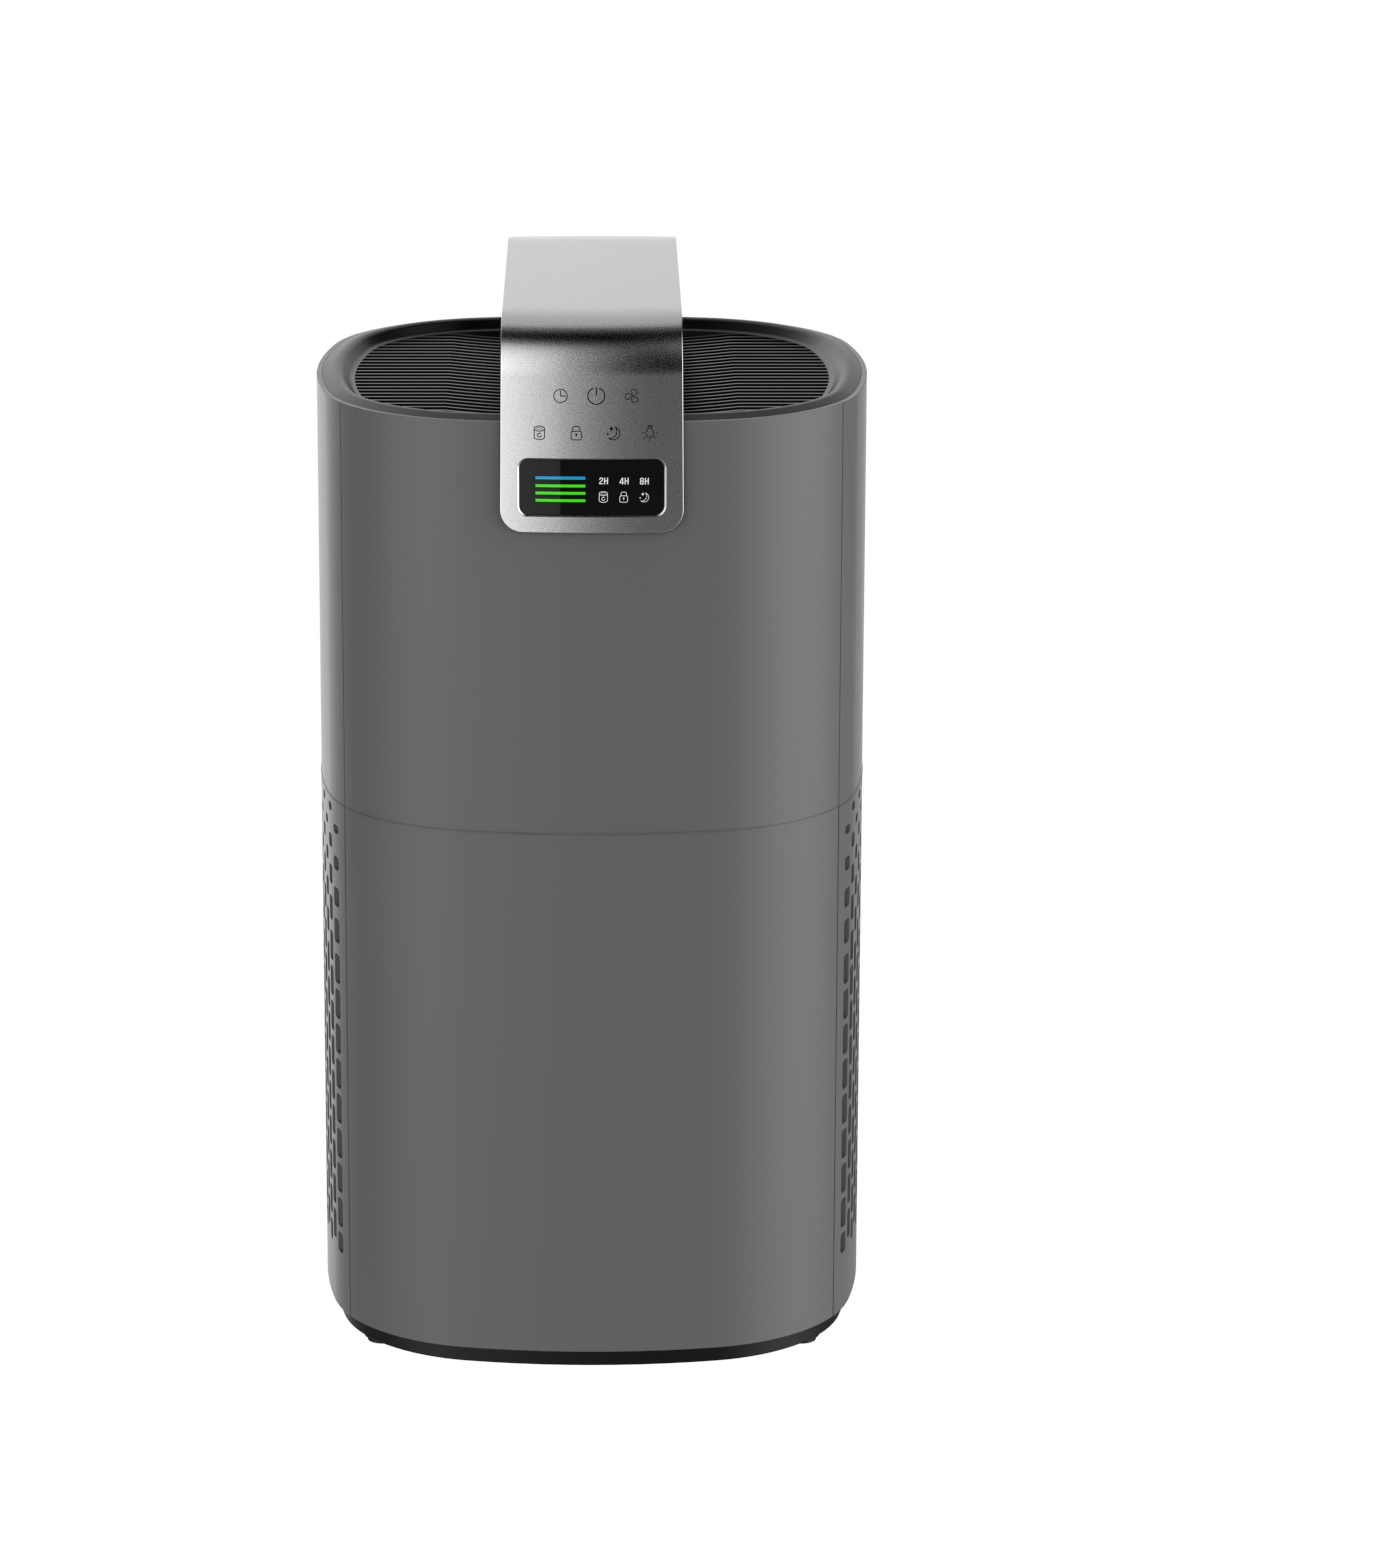 JNUO Air Purifier - Aesthetic Design for Any Home Decor